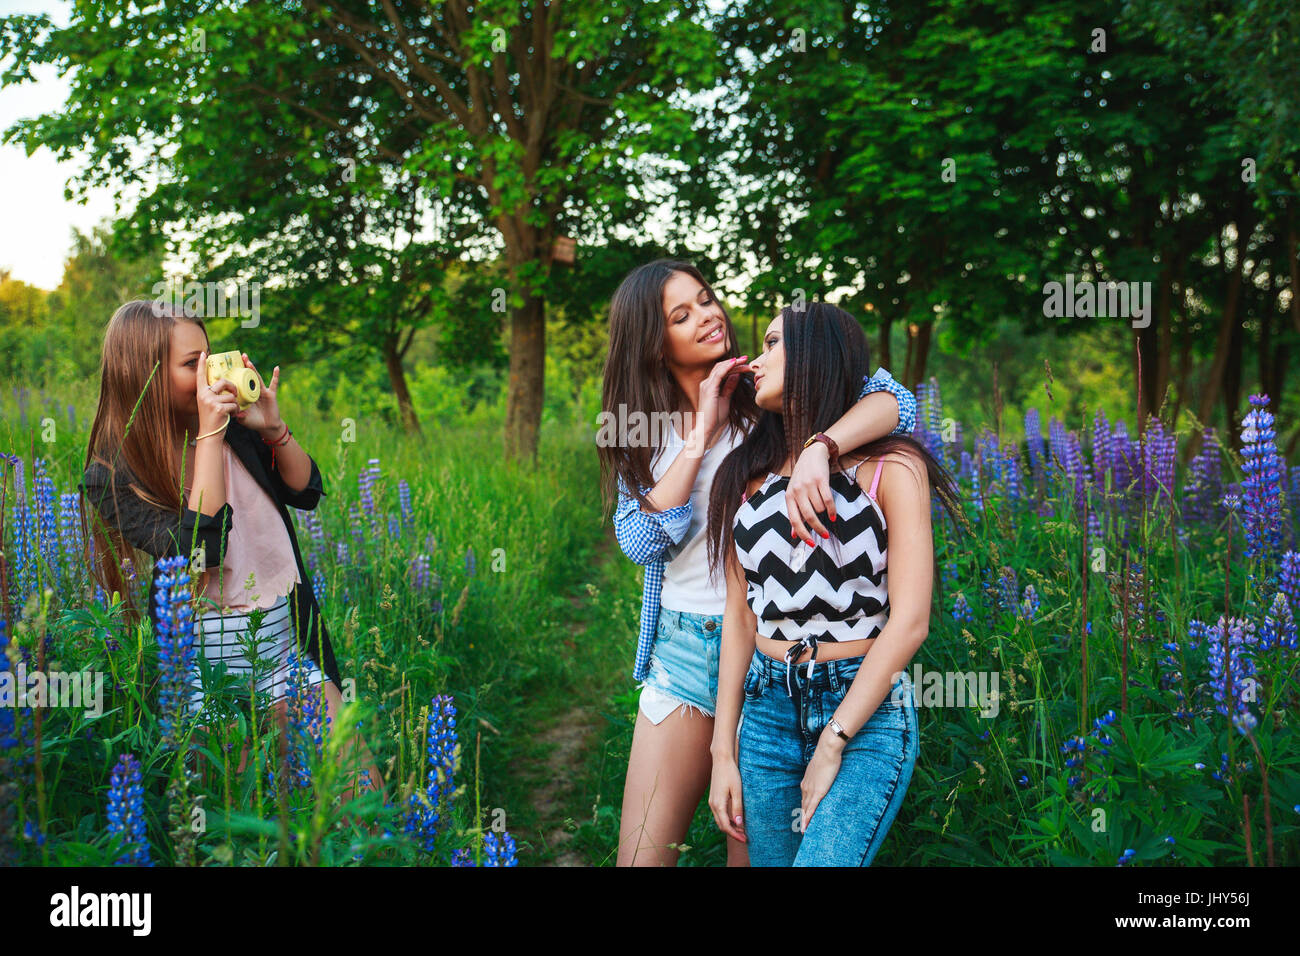 Three hipsters girls blonde and brunette taking self portrait on polaroid camera and smiling outdoor. Girls having fun together in park. Stock Photo